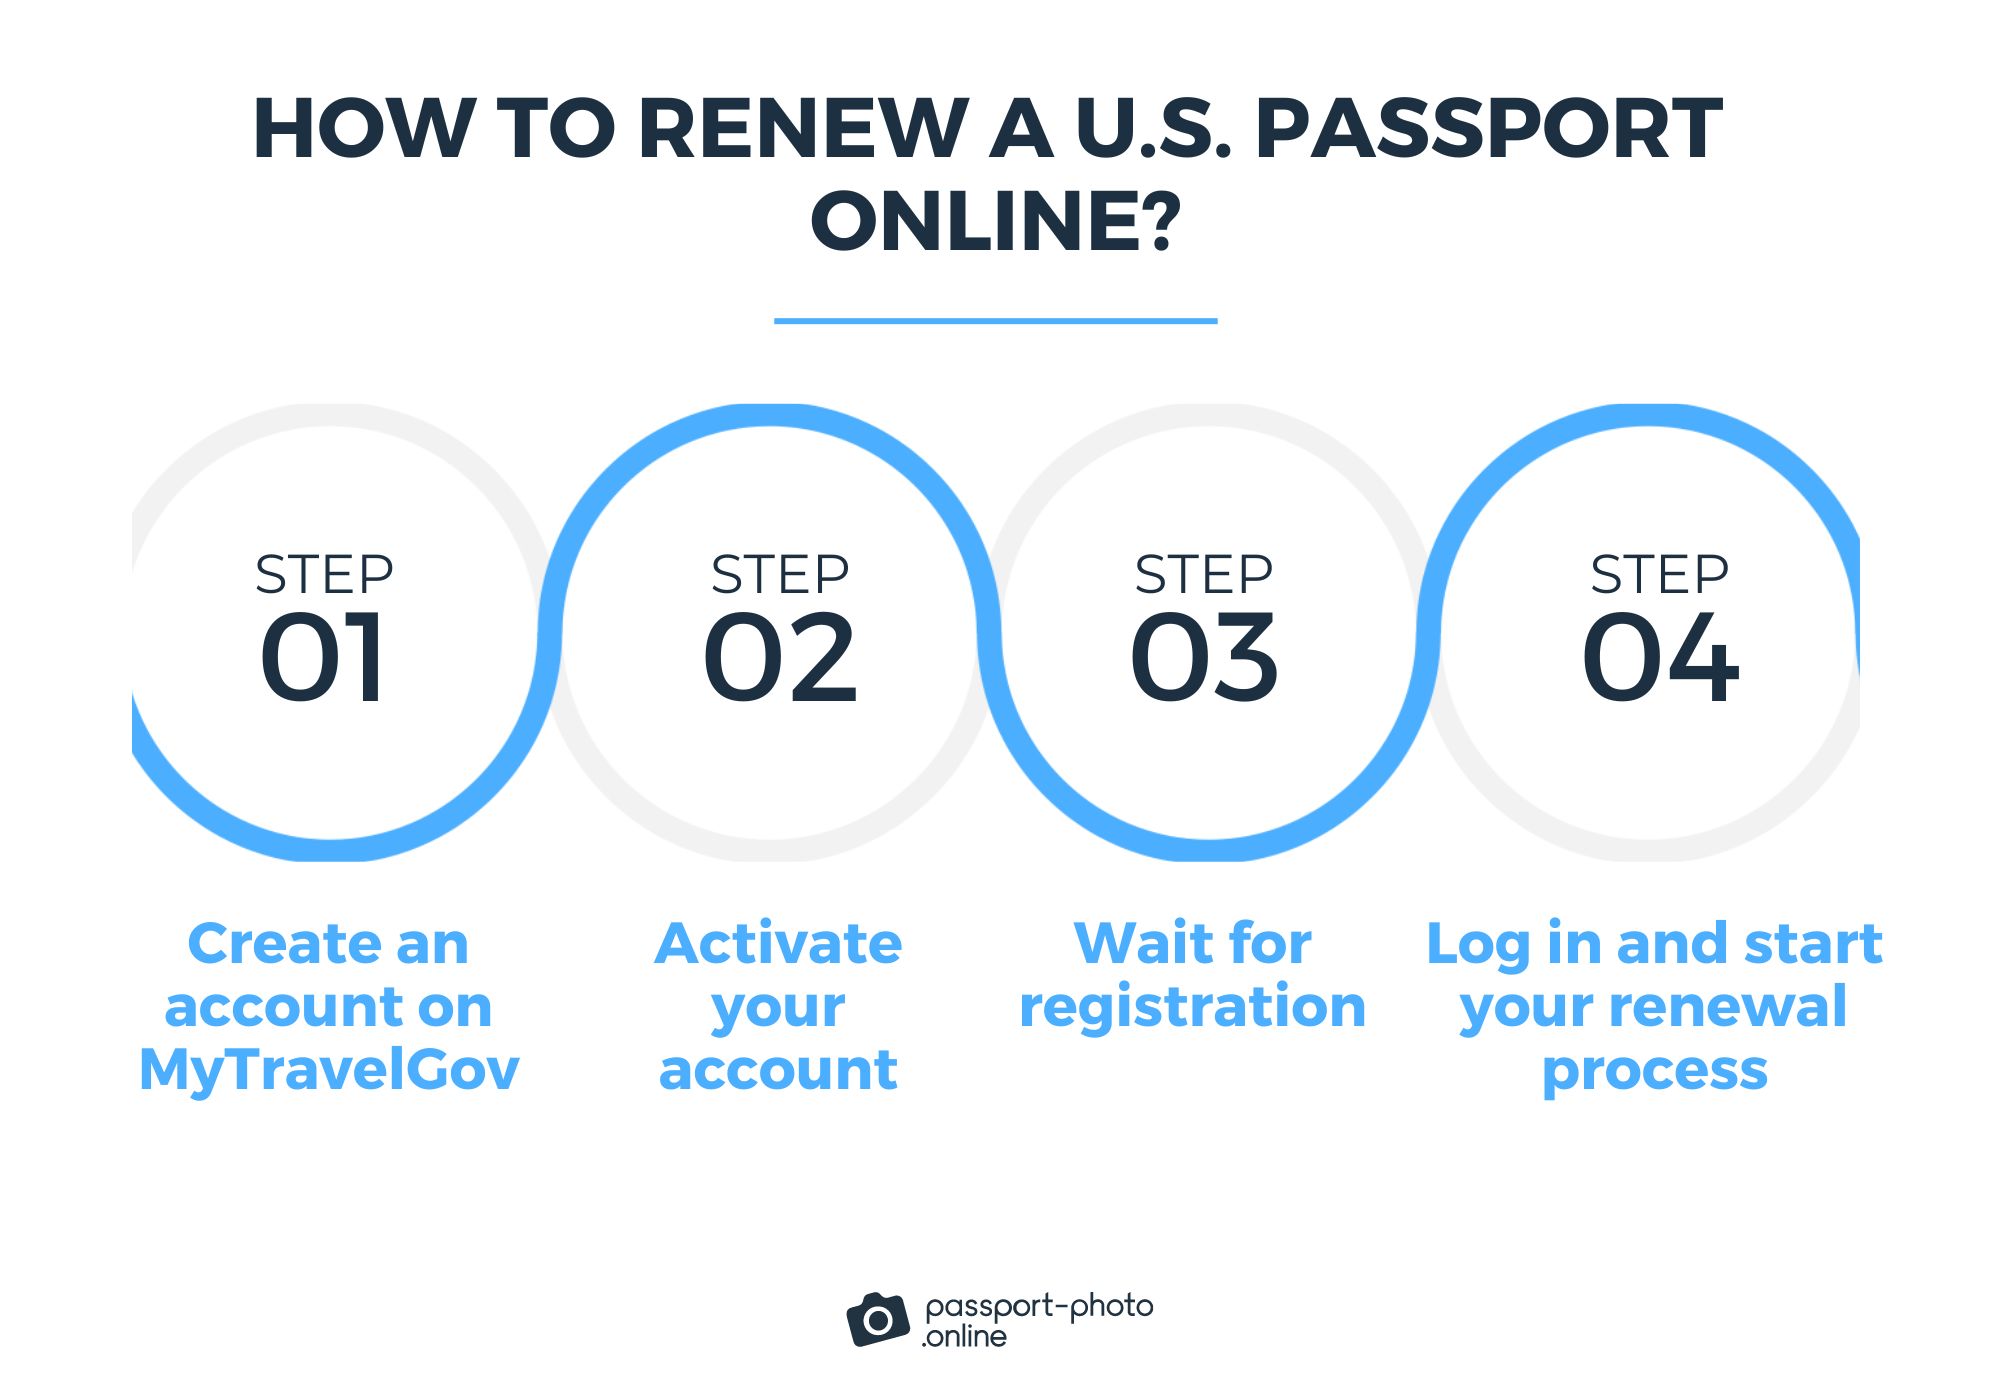 4 steps explaining how to renew a US passport online.